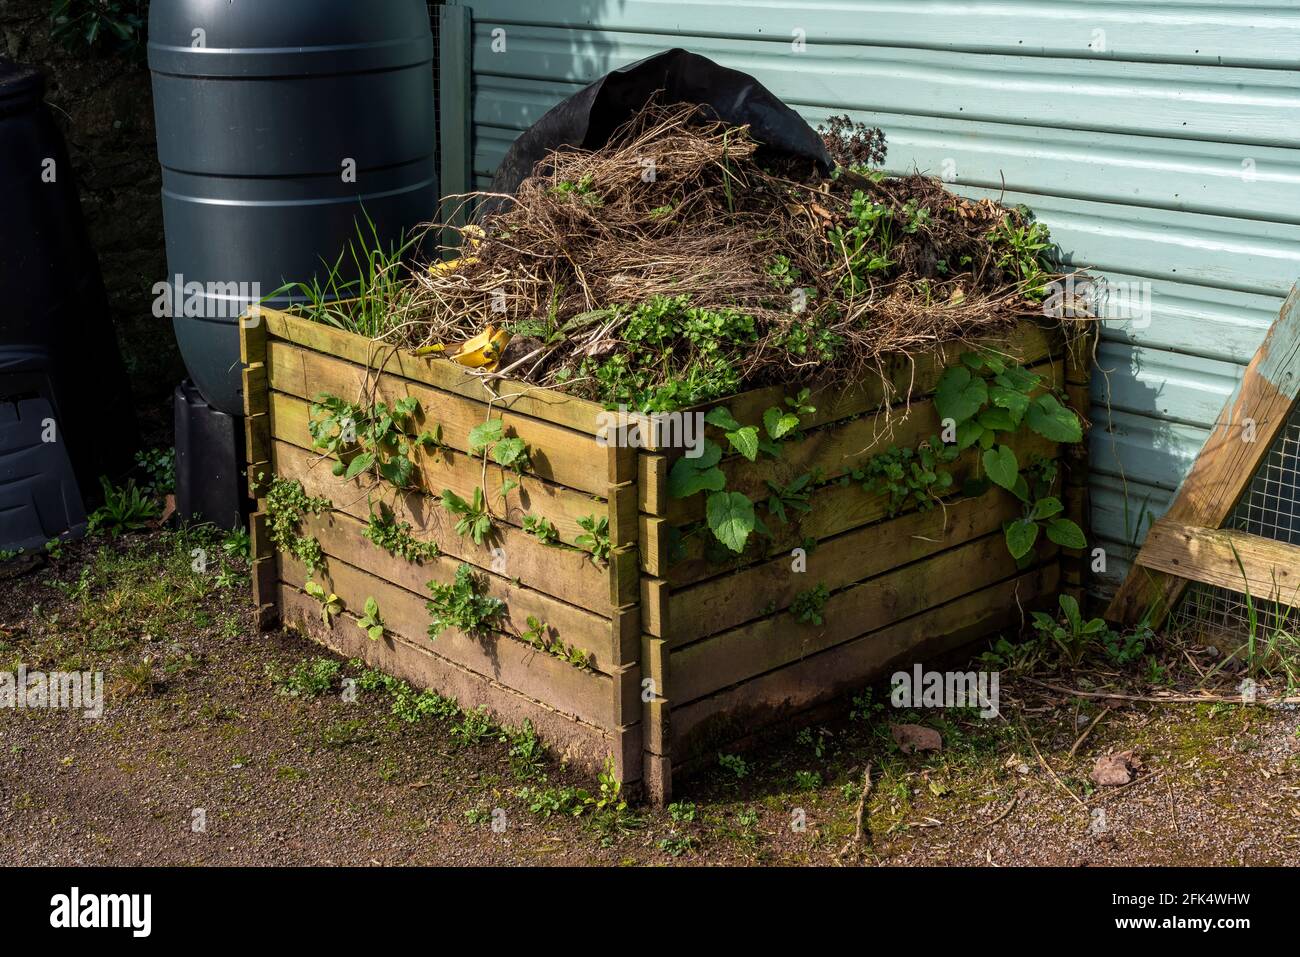 Wooden compost bin full of rotting vegetation garden waste to be recycled in the spring as compost and mulch for the vegetable patch after being allow Stock Photo